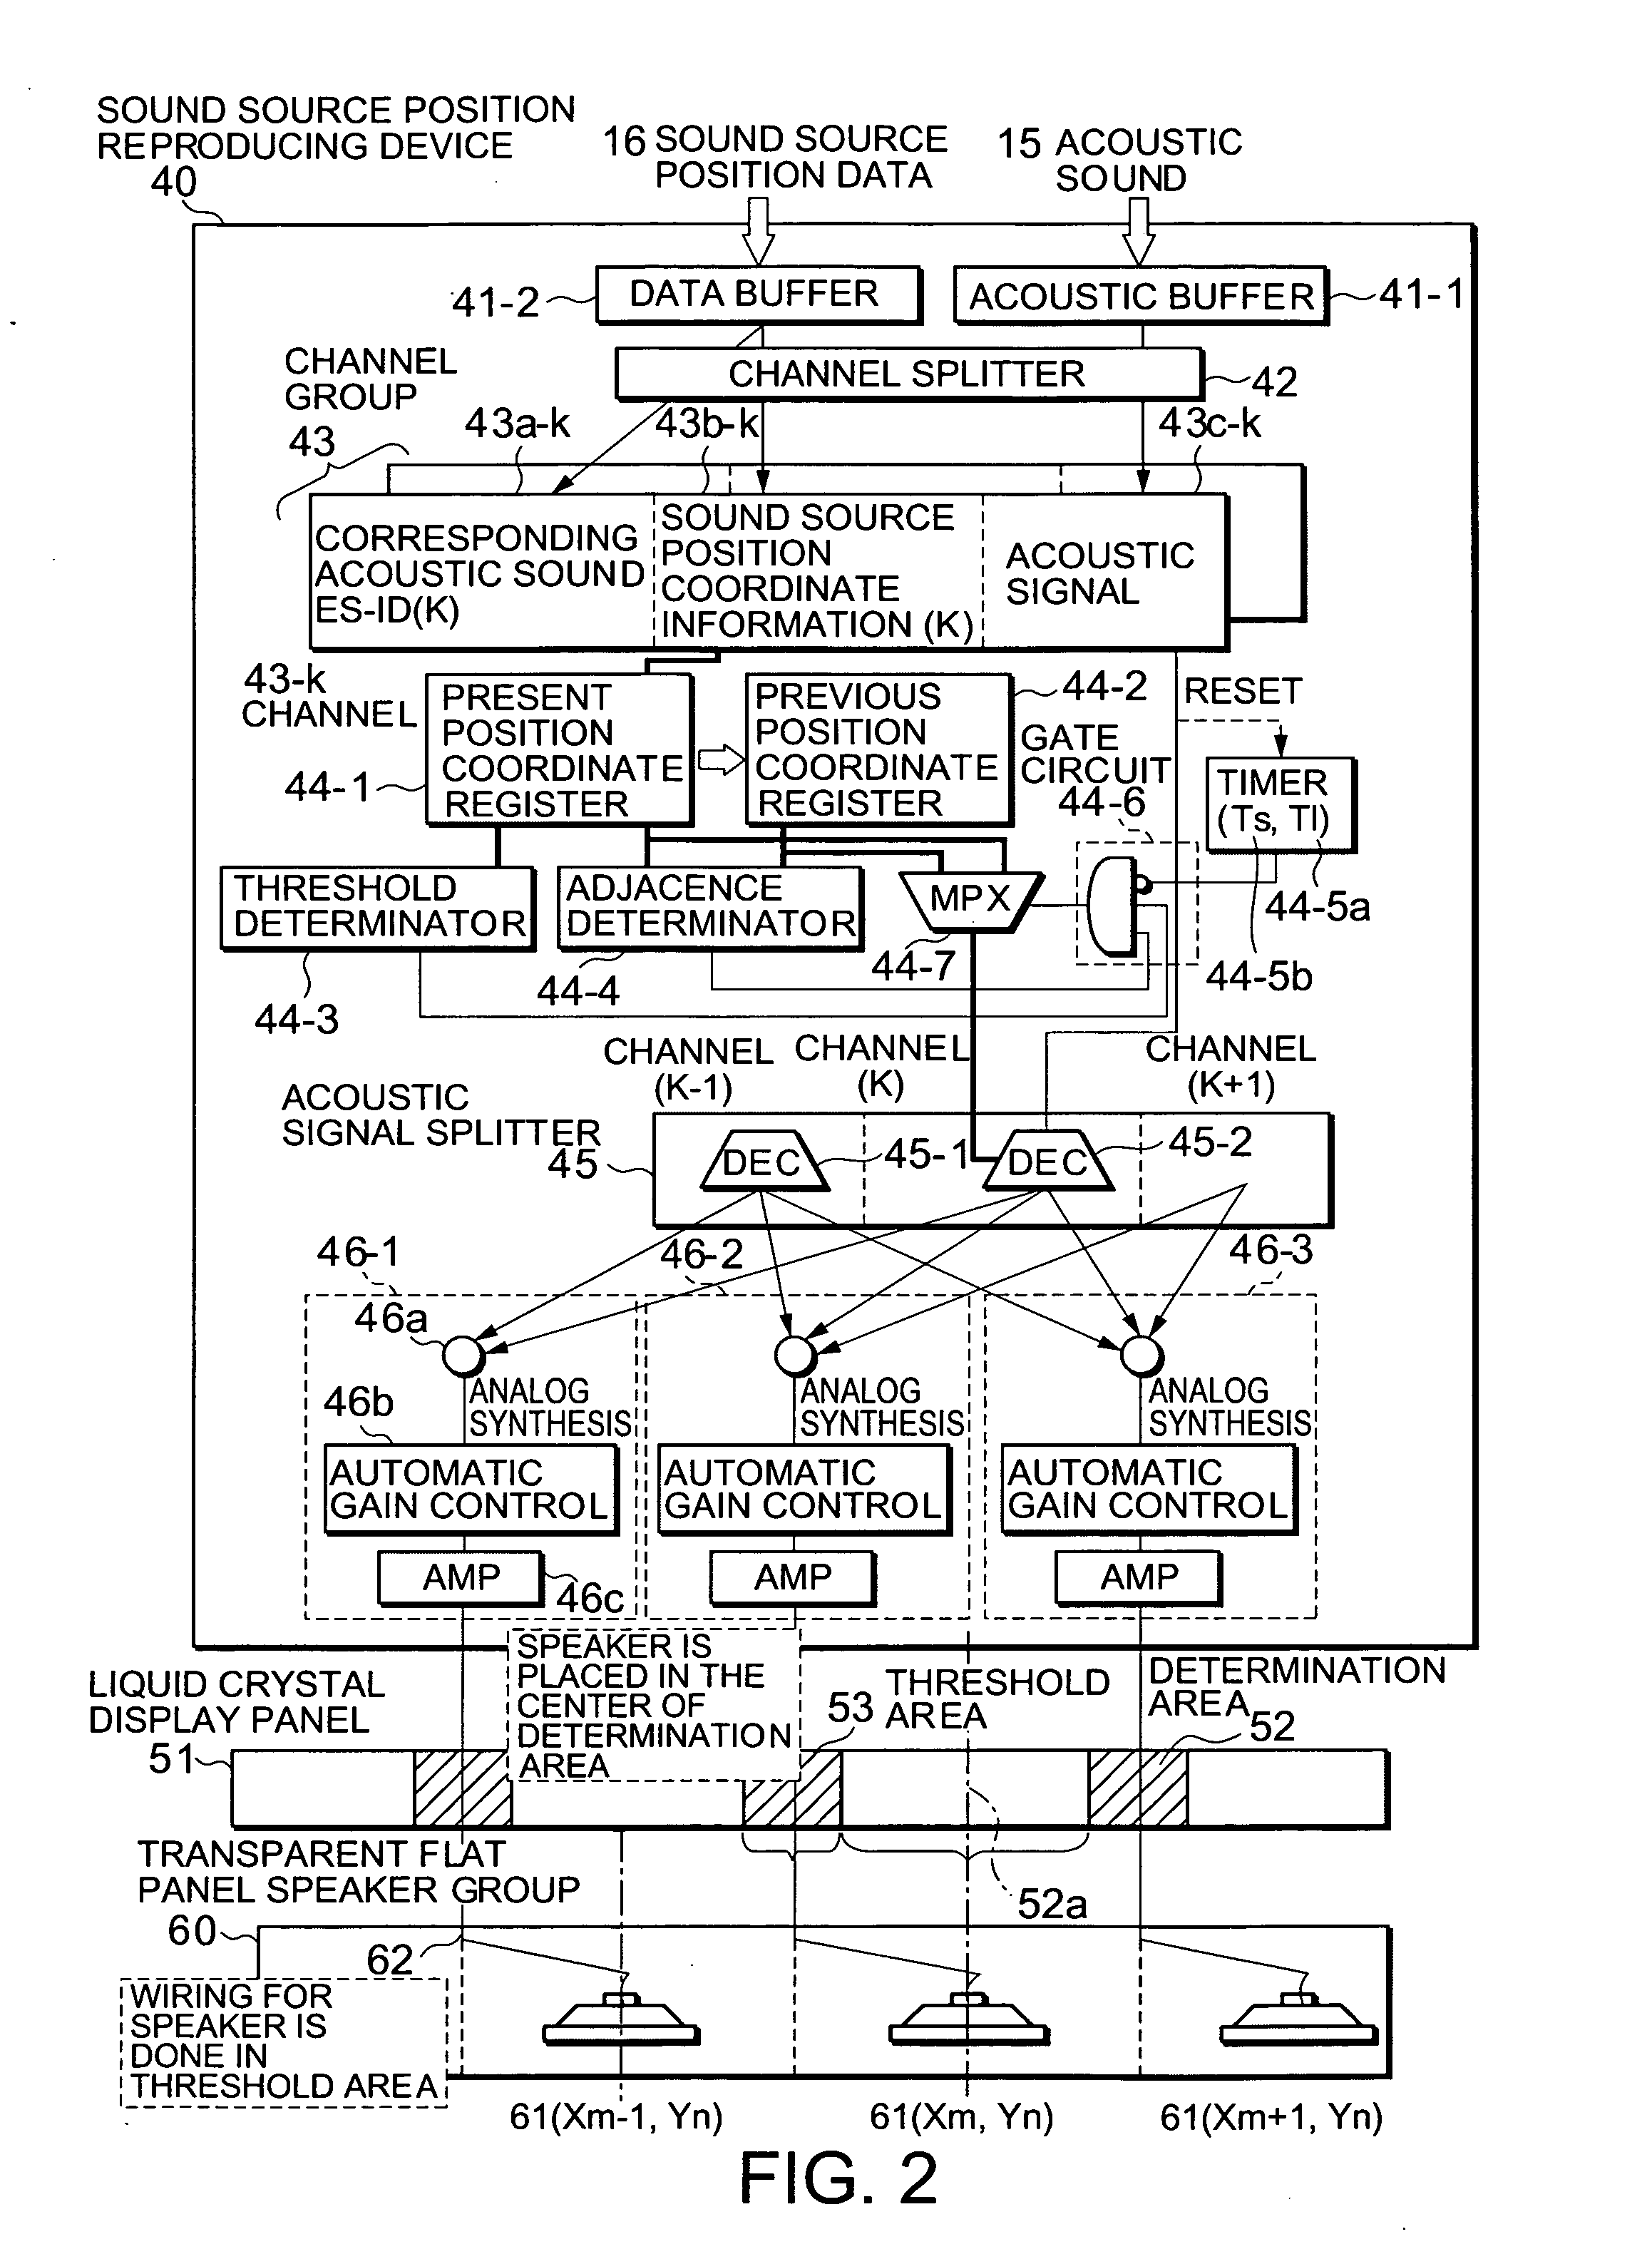 System and method for reproducing moving picture